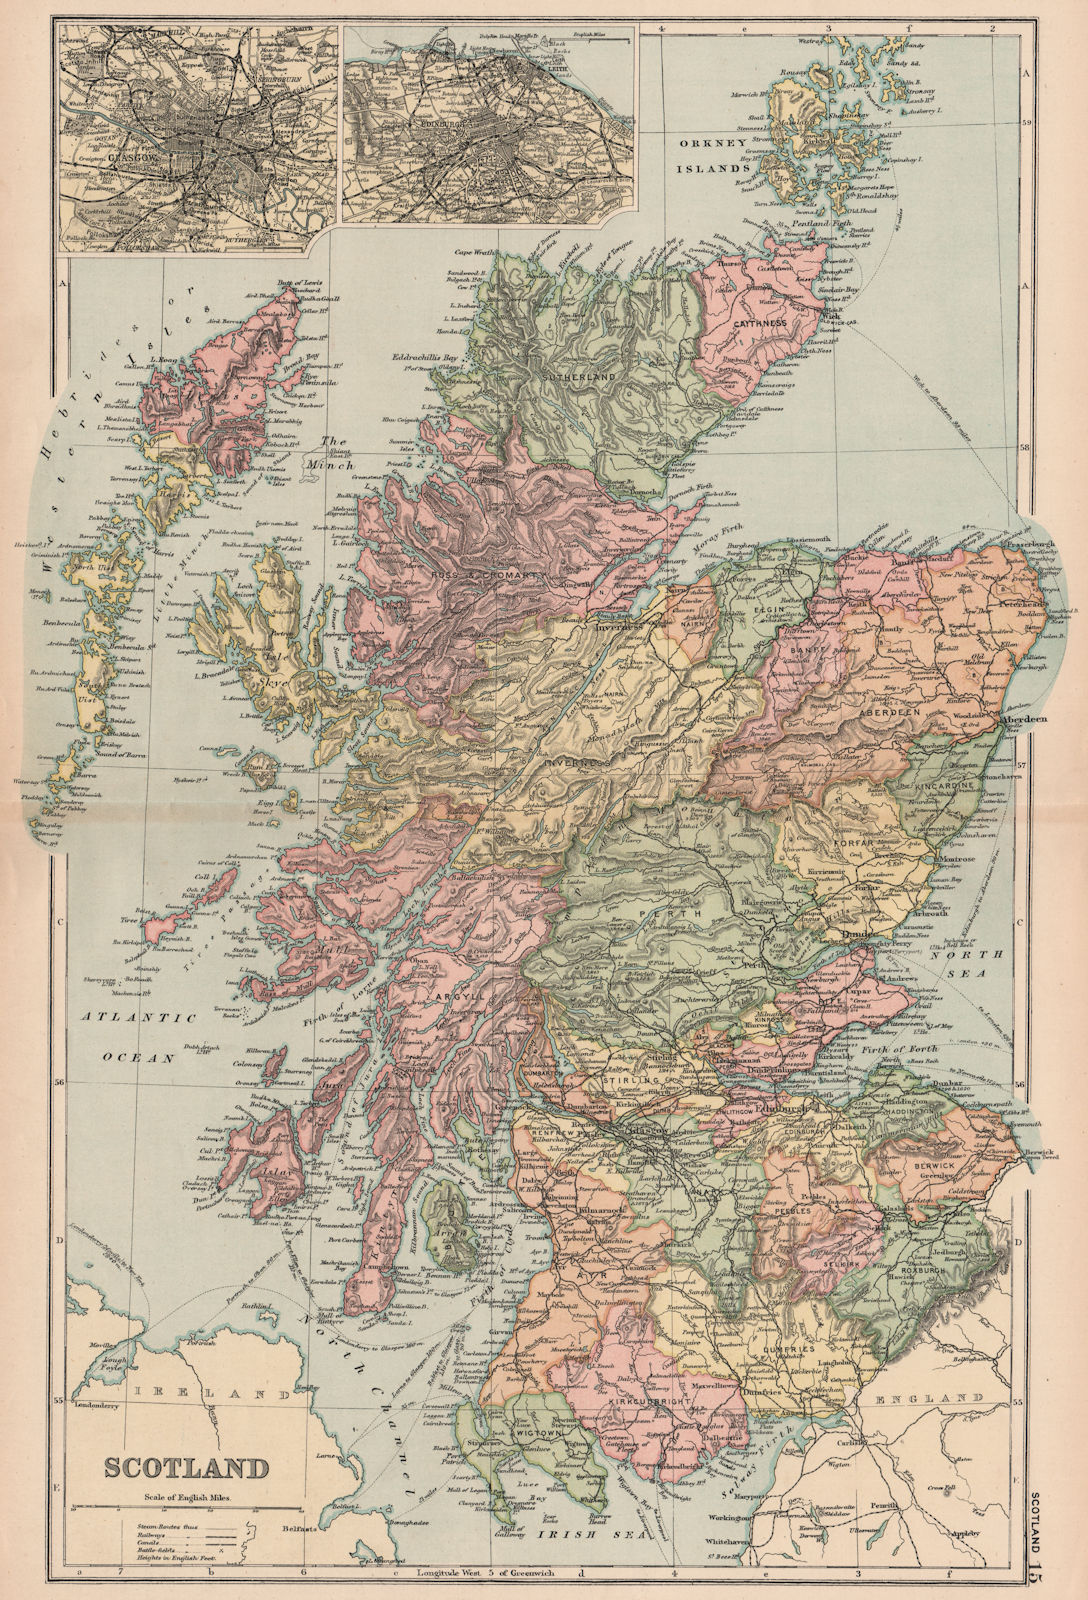 Associate Product SCOTLAND. Showing counties. inset Glasgow & Edinburgh. BACON 1893 old map